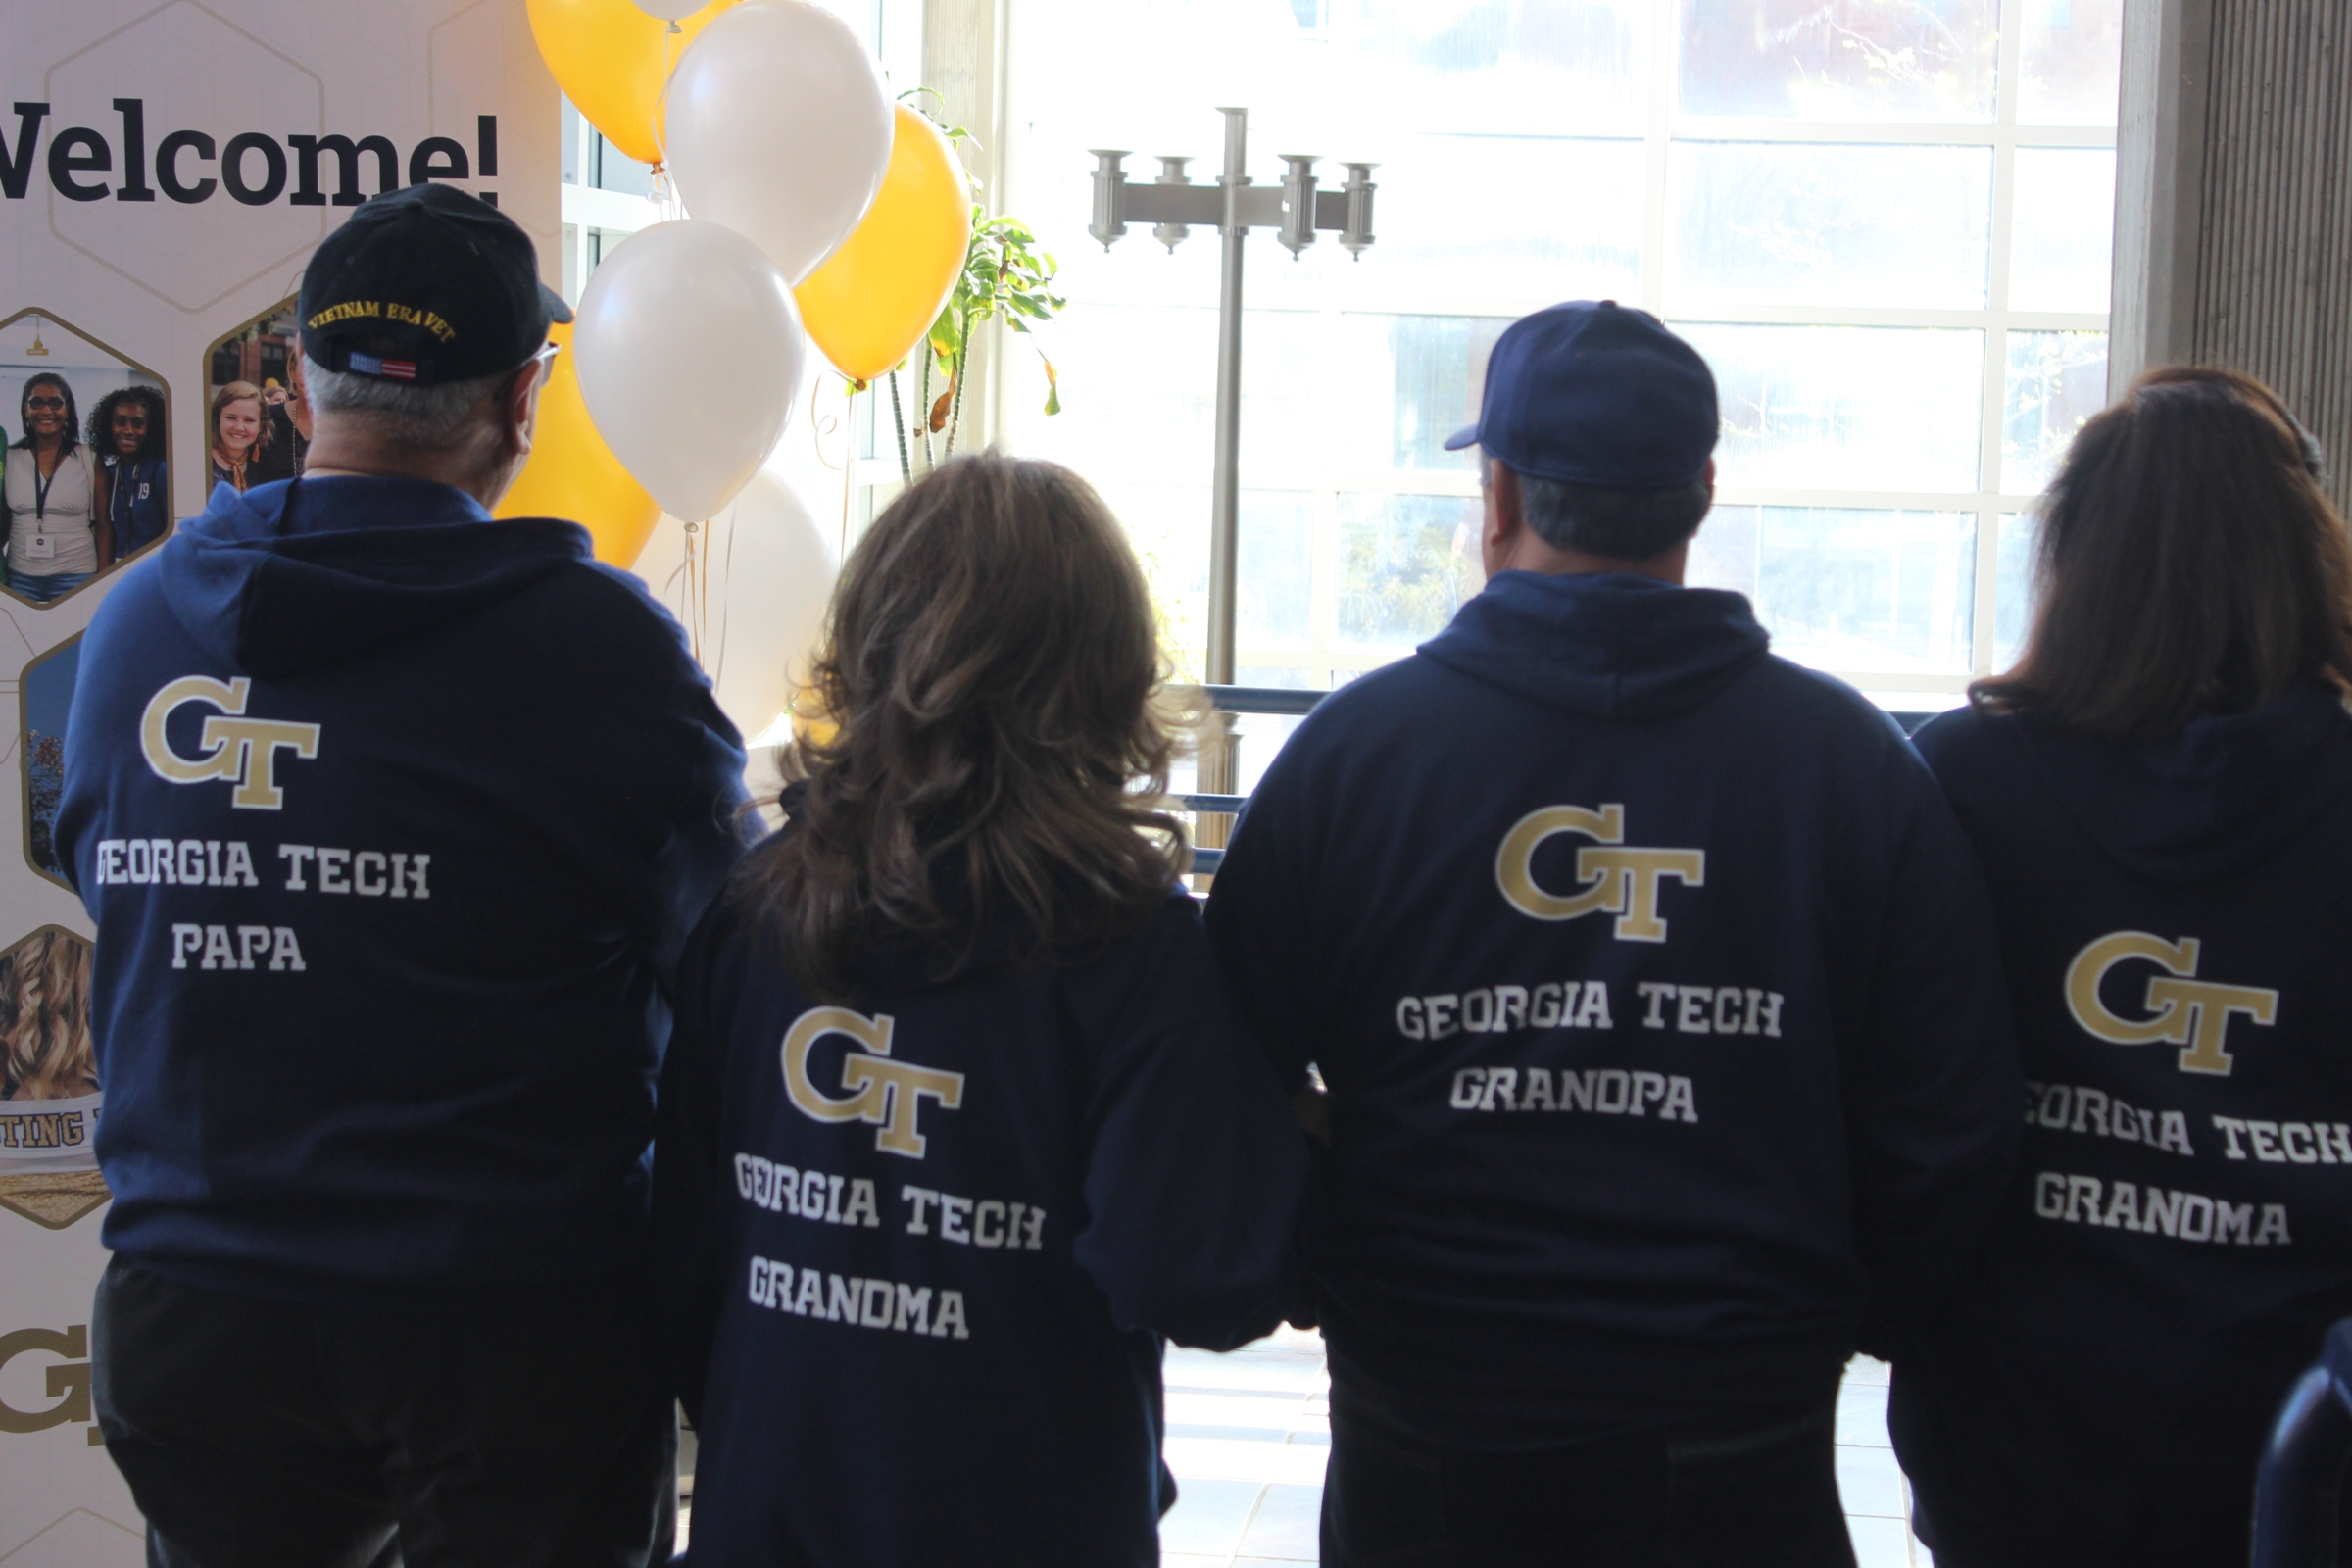 Four people stand with their backs to the camera, their shirts say GT Grandpa, Grandma, and Papa